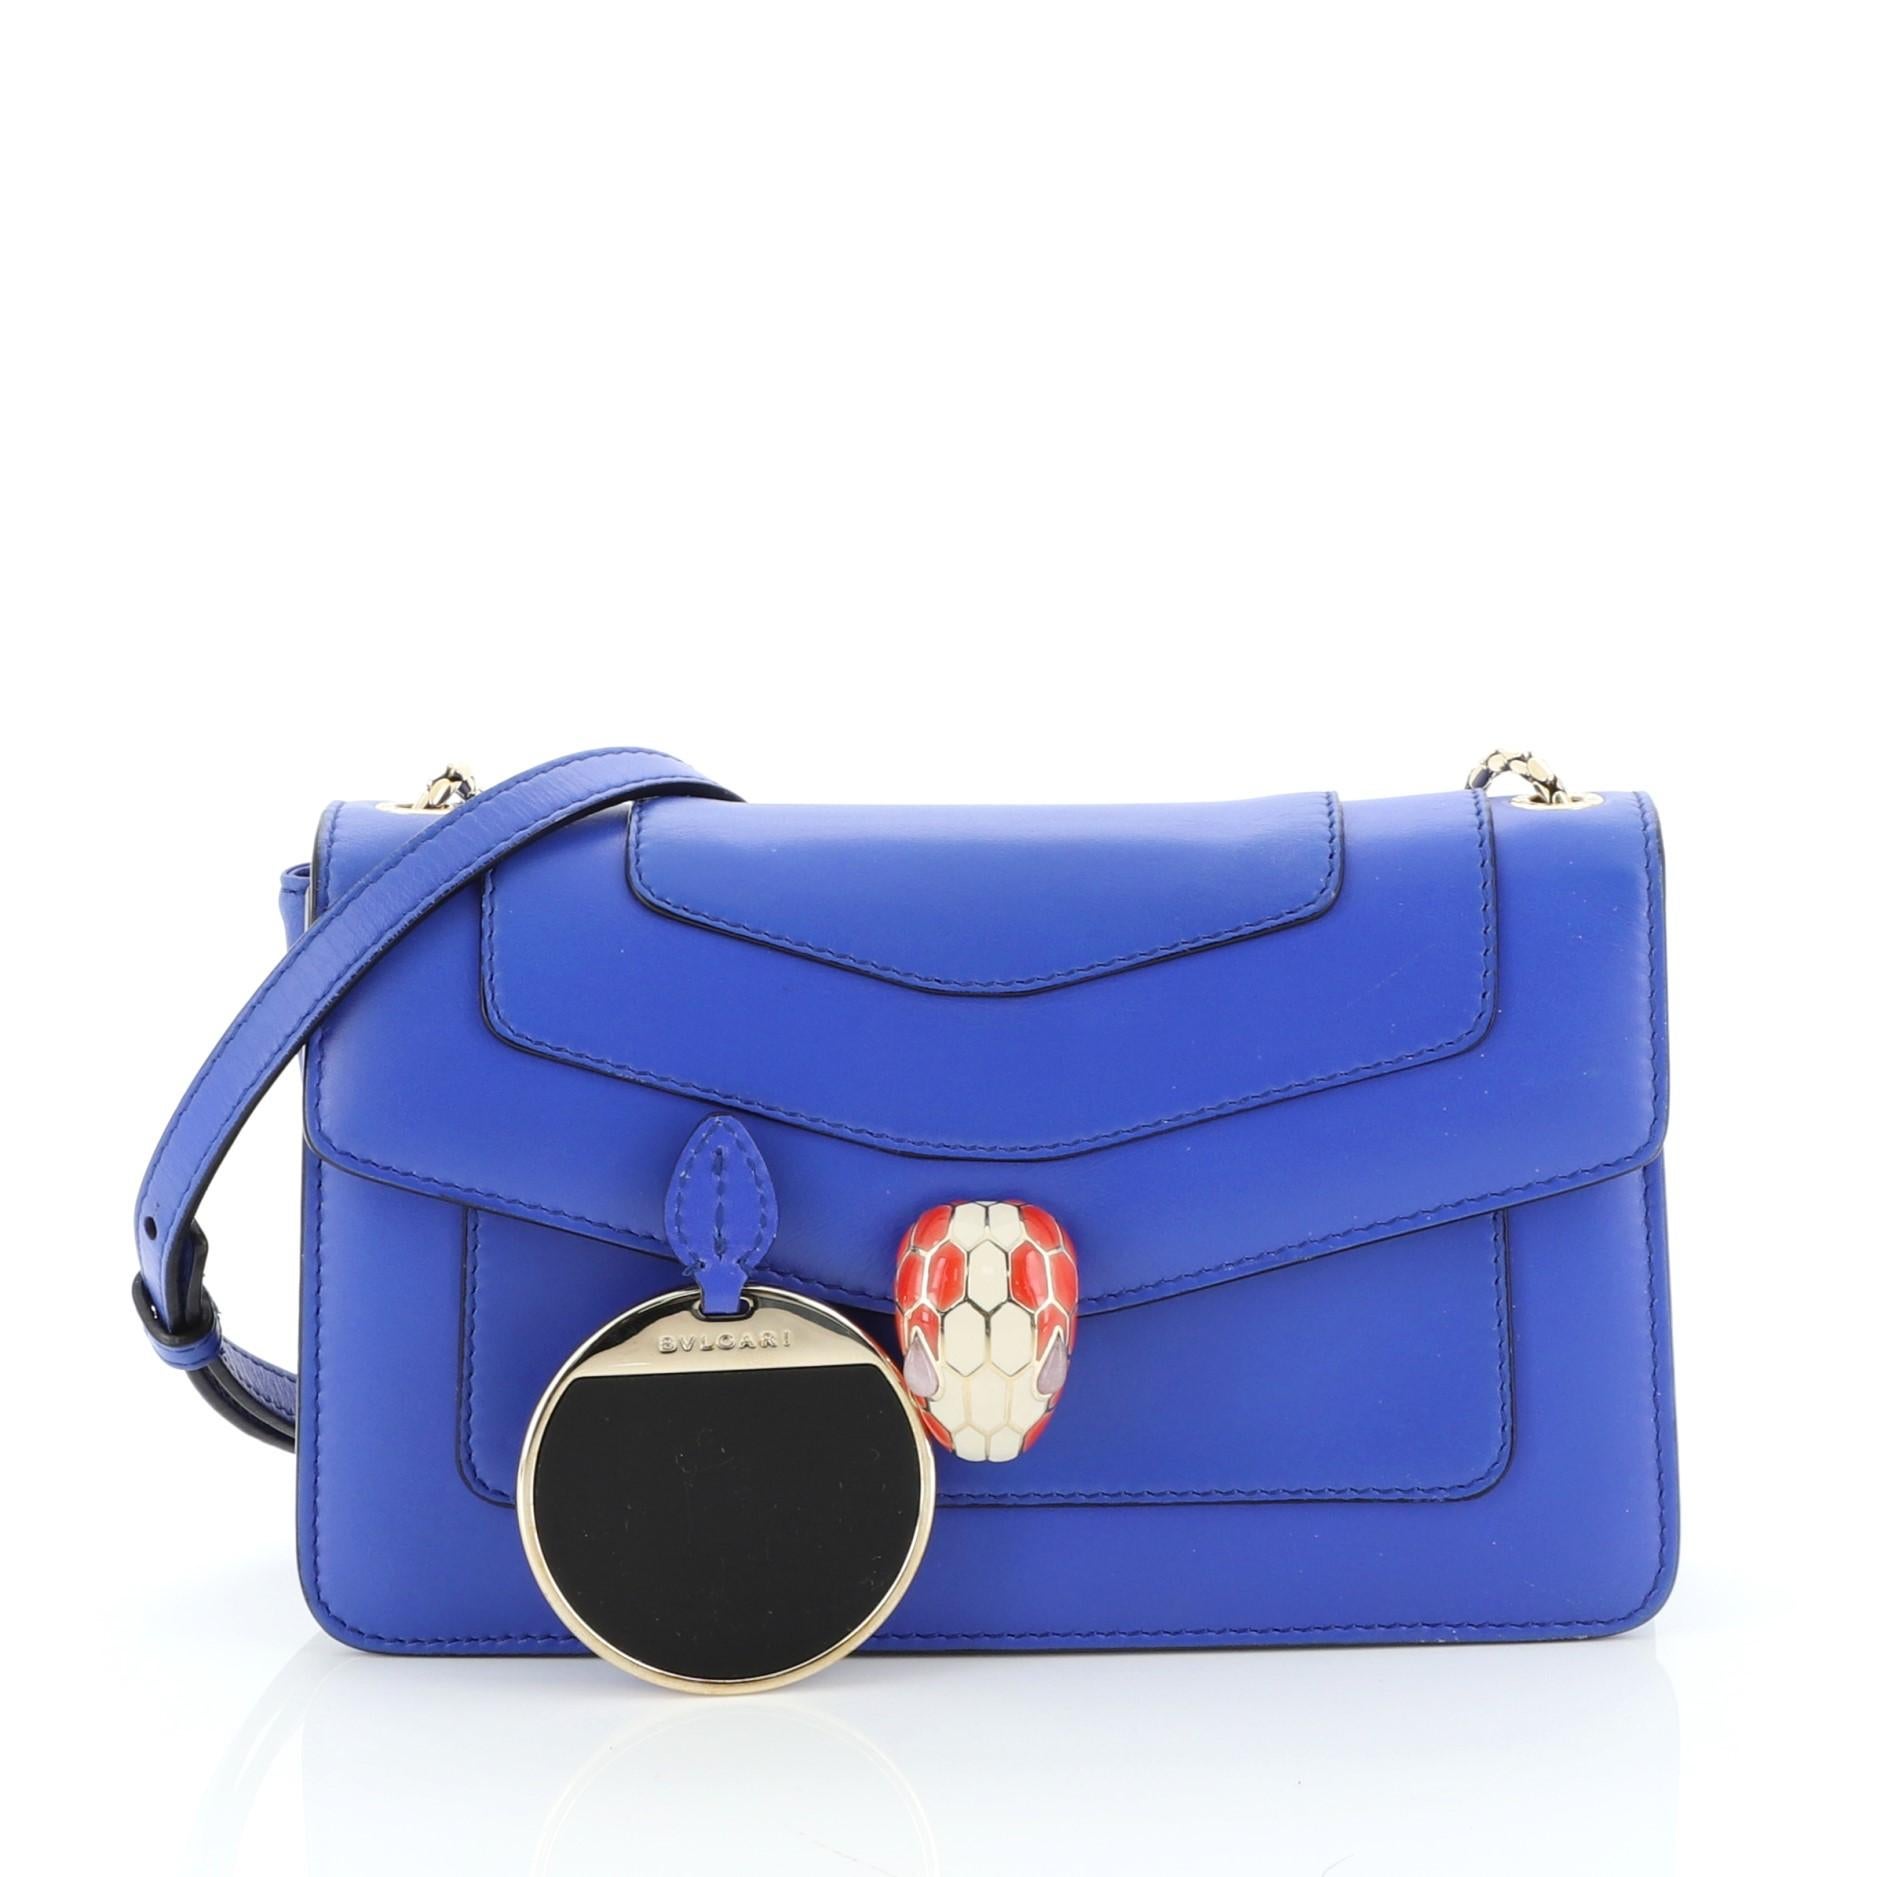 This Bvlgari Serpenti Forever Shoulder Bag Leather Small, crafted from blue leather, features a snake inspired chain strap and gold-tone hardware. Its serpenti head closure opens to a purple fabric interior with side slip pocket. 

Estimated Retail